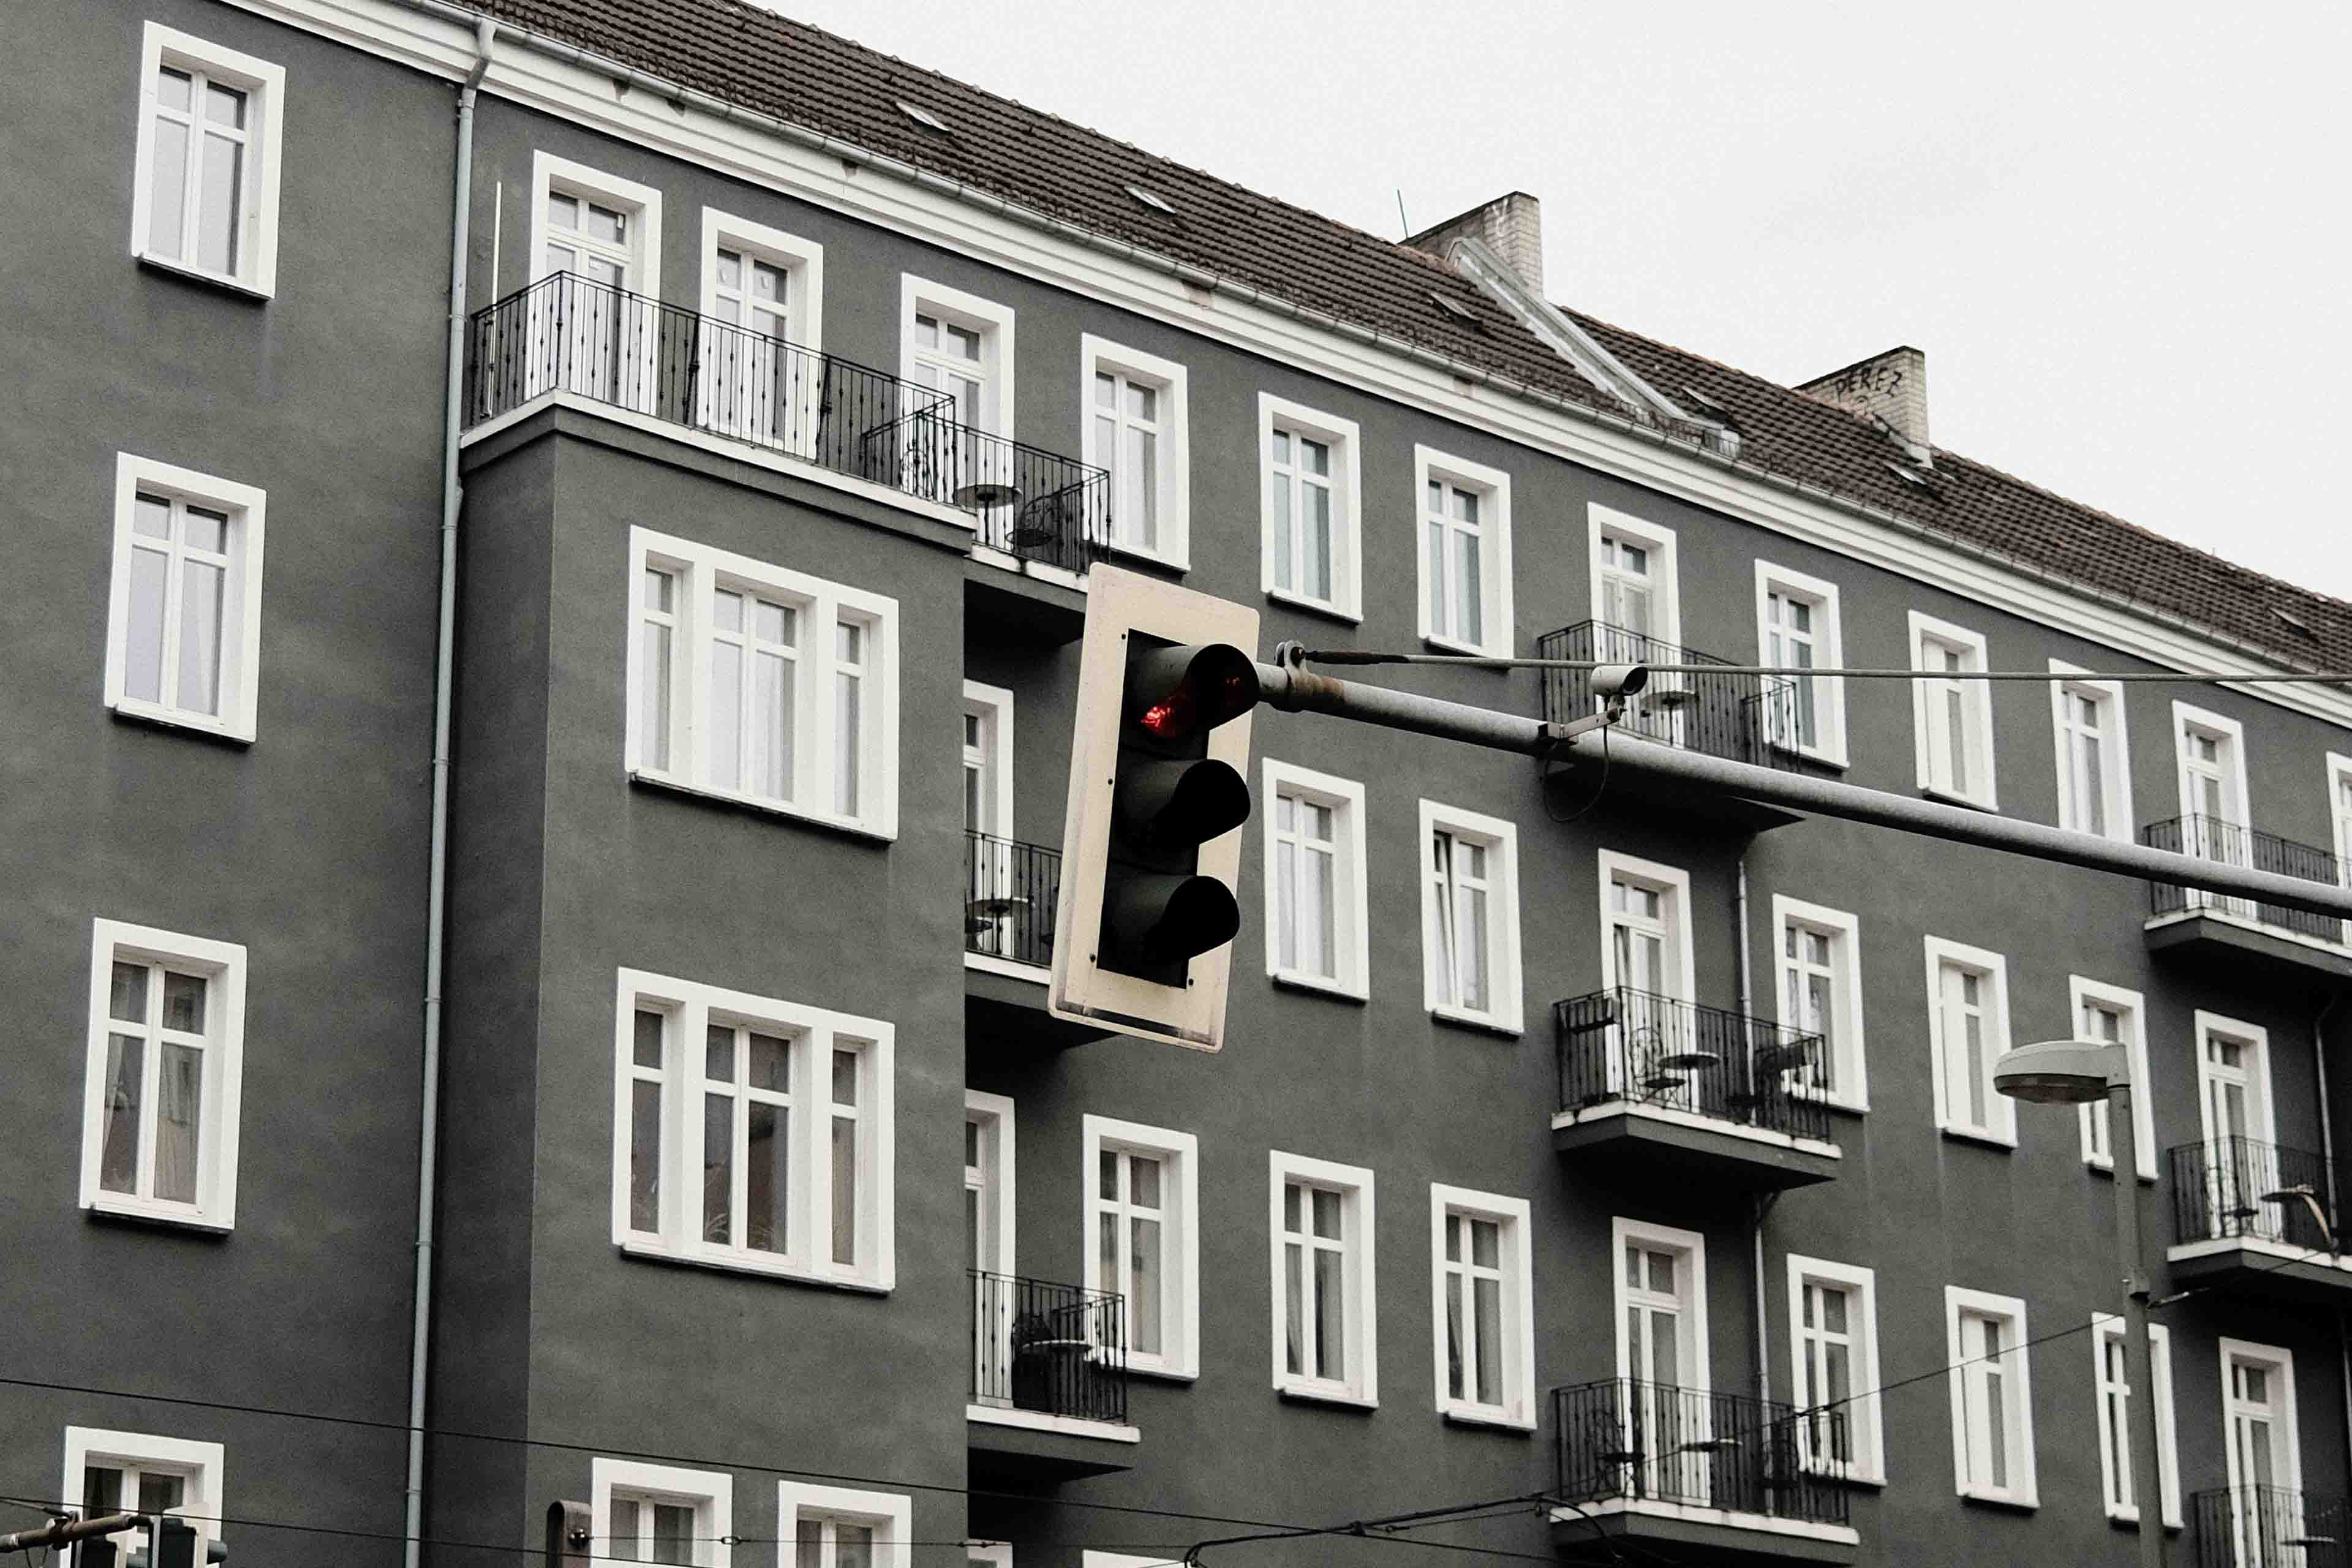 a traffic light aligning with the pattern of windows behind it